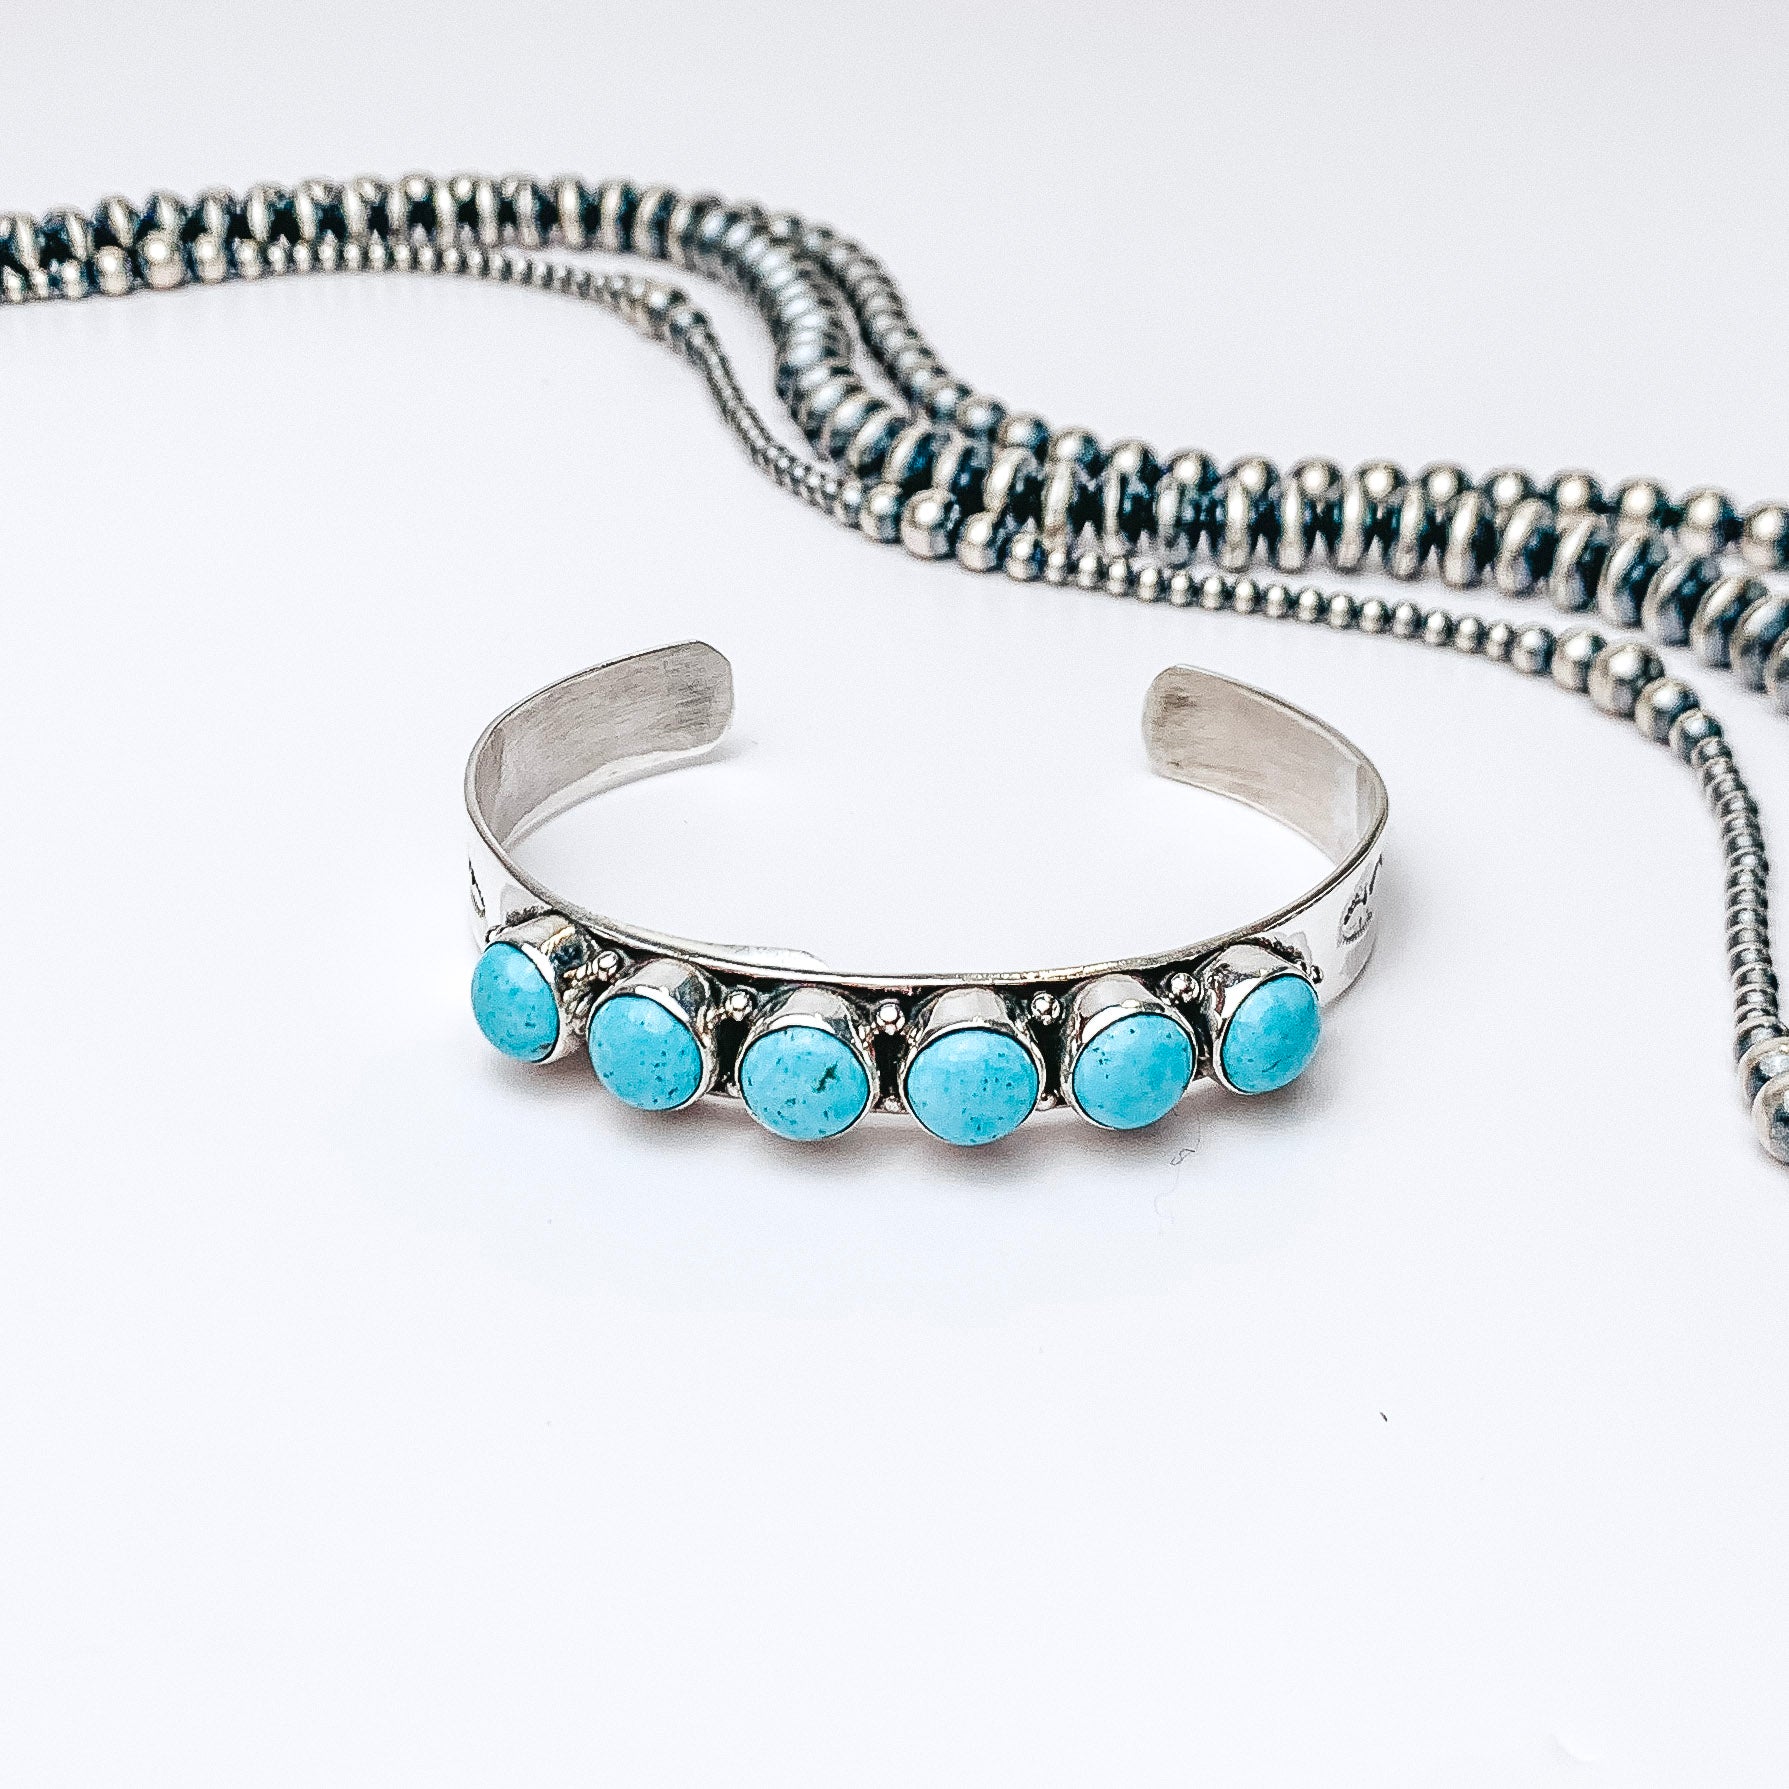 Centered in the picture is a cuff with six kingman turquoise stones. Navajo pearls are laid above the cuff, all on a white background.